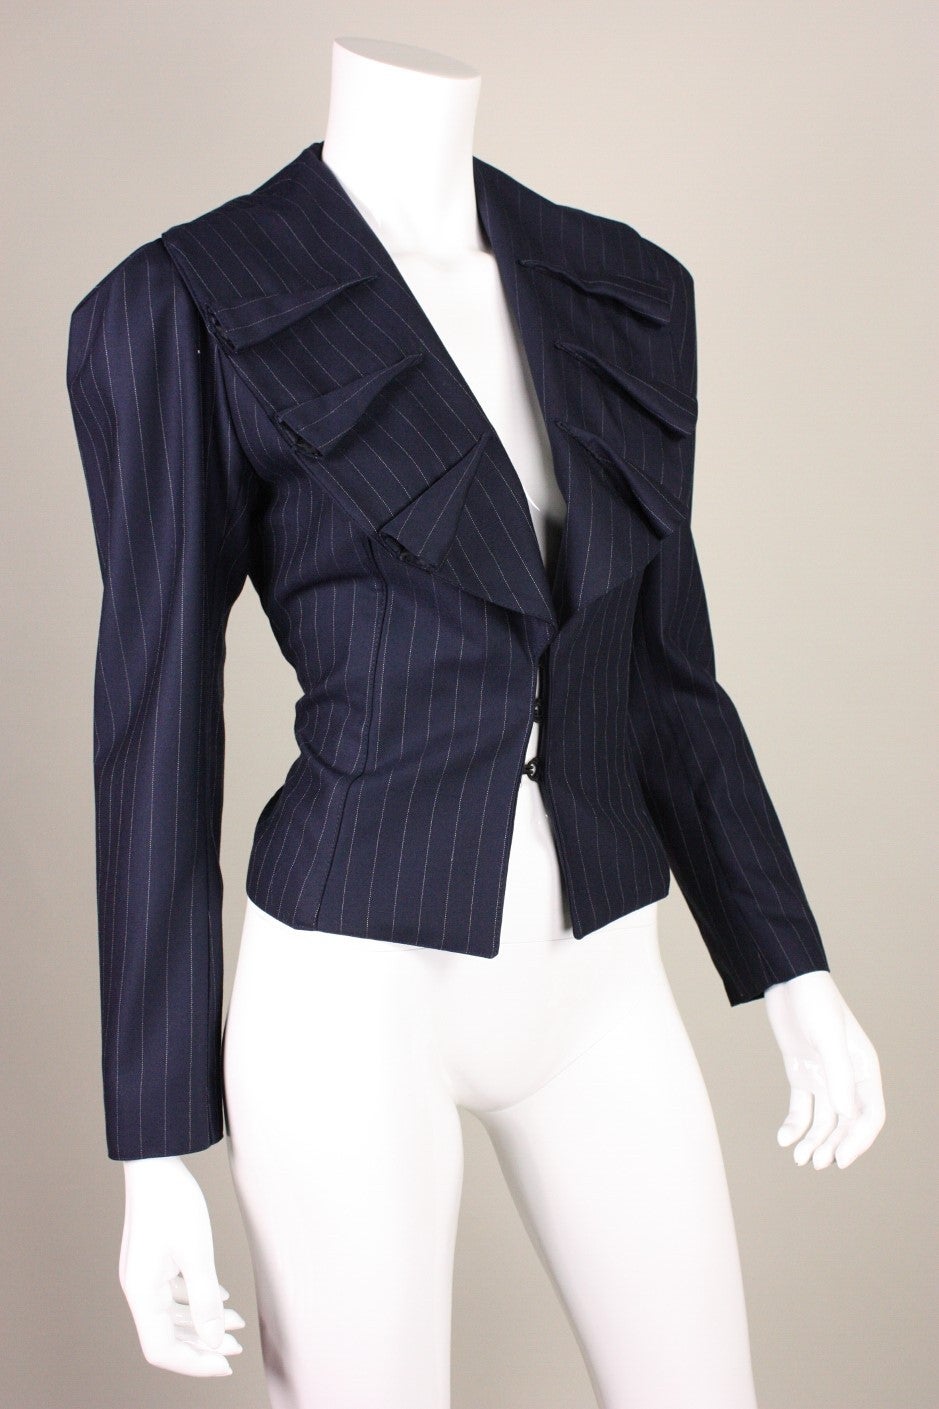 Vintage blazer from Norma Kamali's OMO line is made of a fine navy wool with a pinstripe pattern.  Wide shawl collar with raised detailing.  Center front large hook and eye closures.  Lined.

No size label, but we estimate it would fit a size